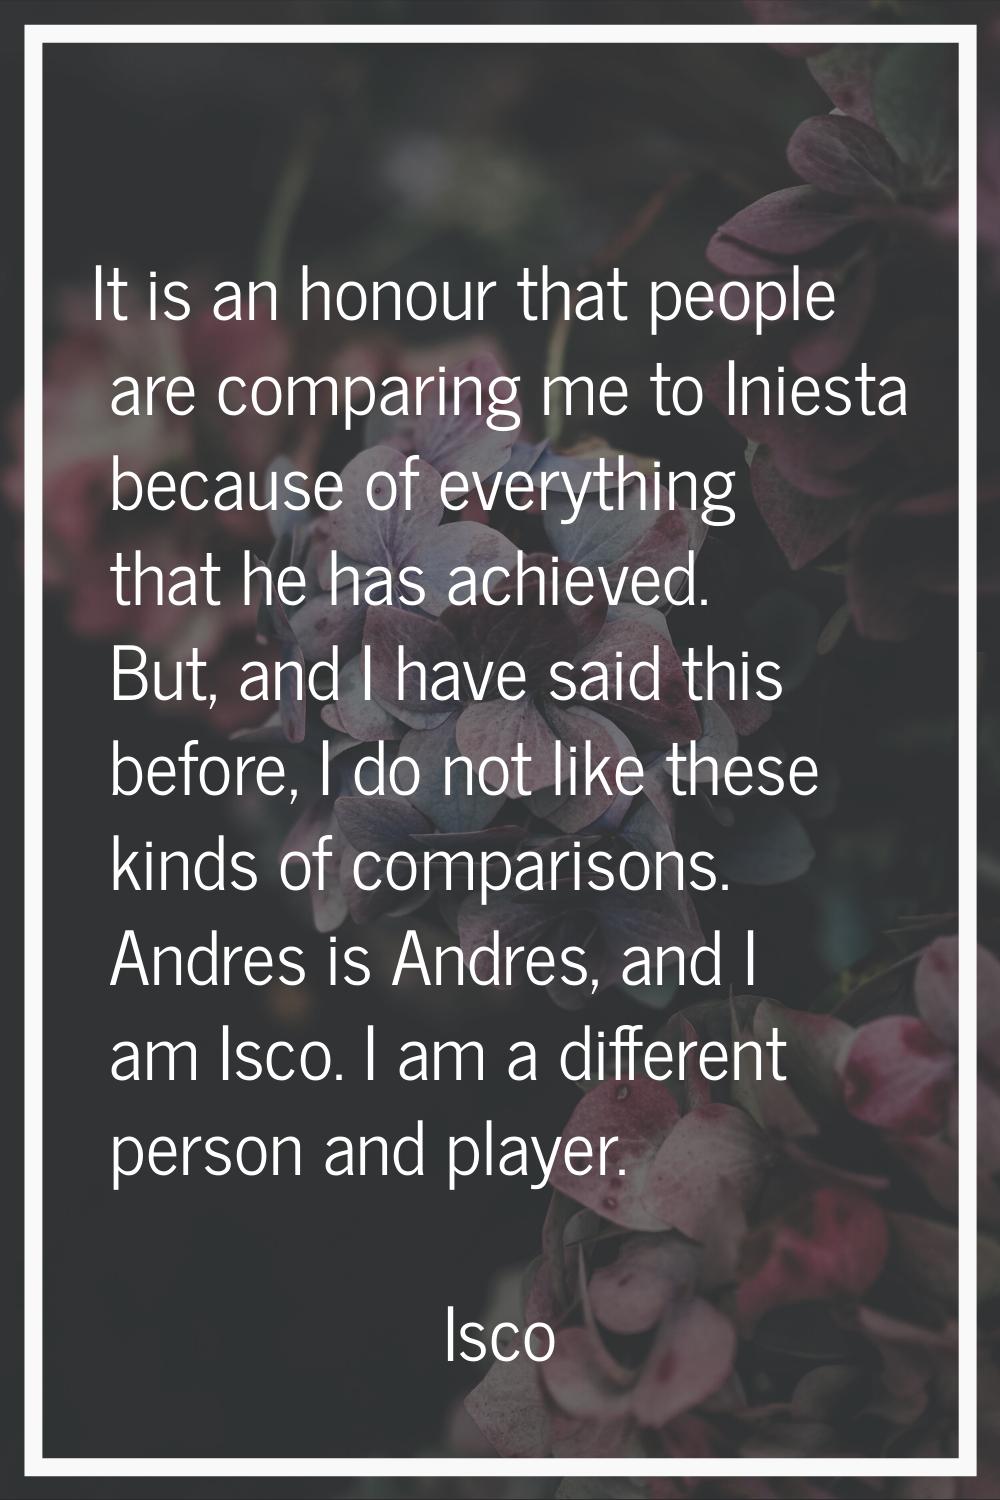 It is an honour that people are comparing me to Iniesta because of everything that he has achieved.